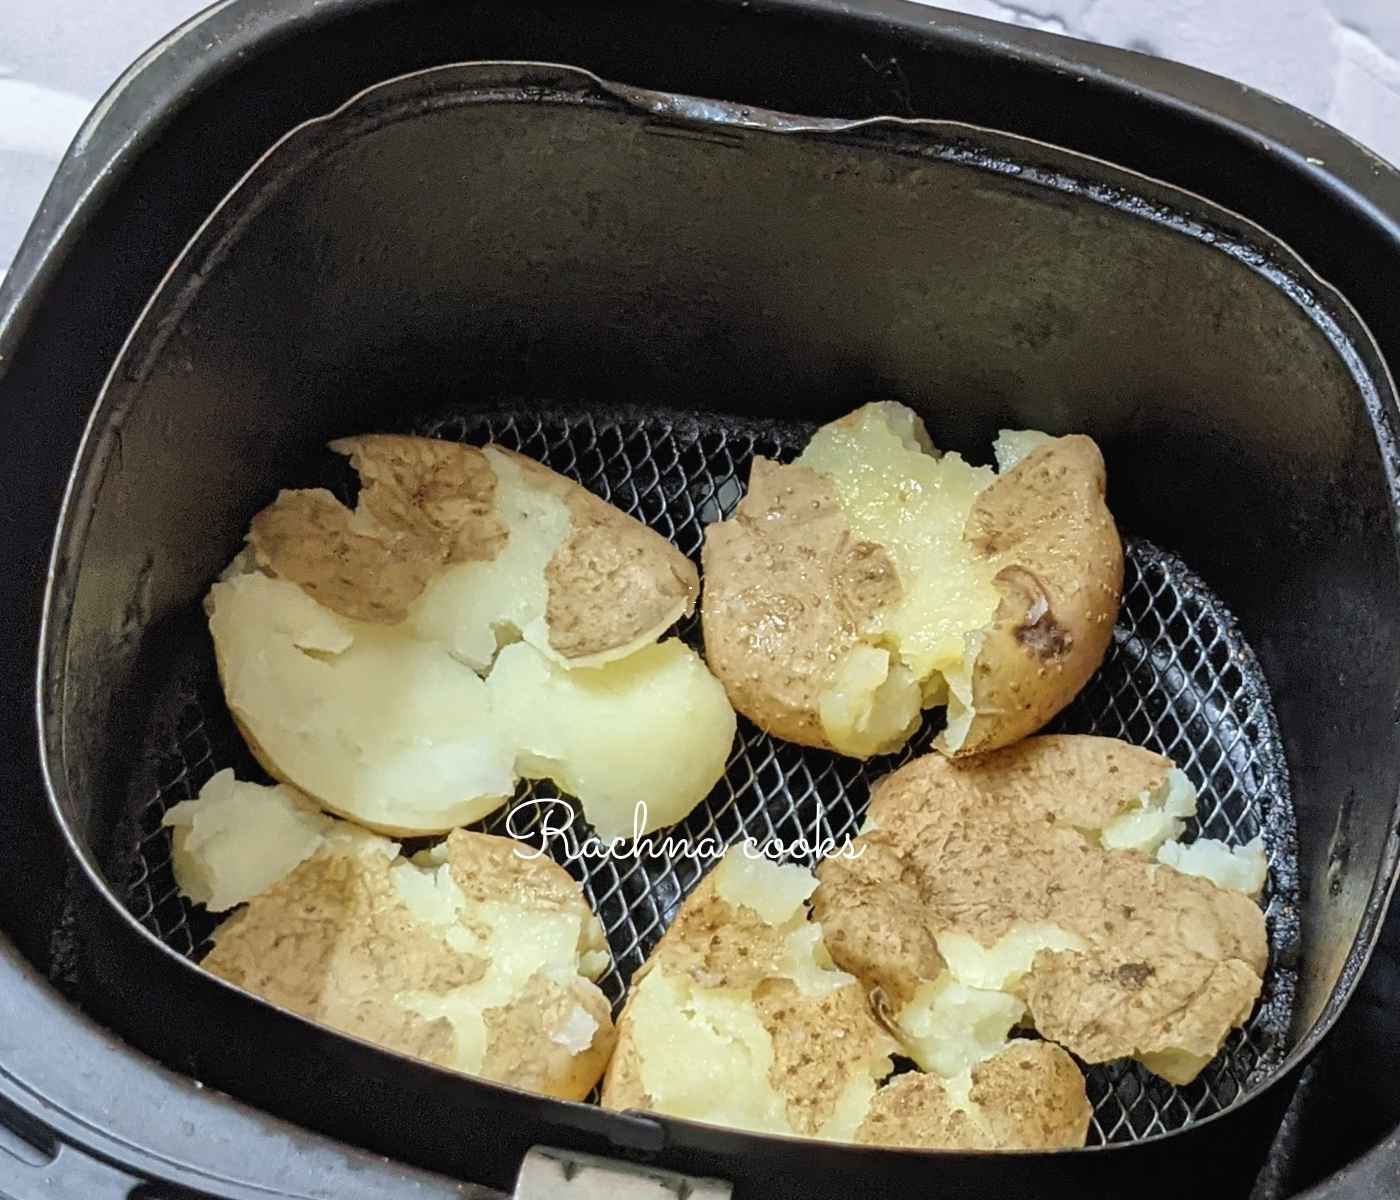 Smashed potatoes placed in air fryer basket for air frying.